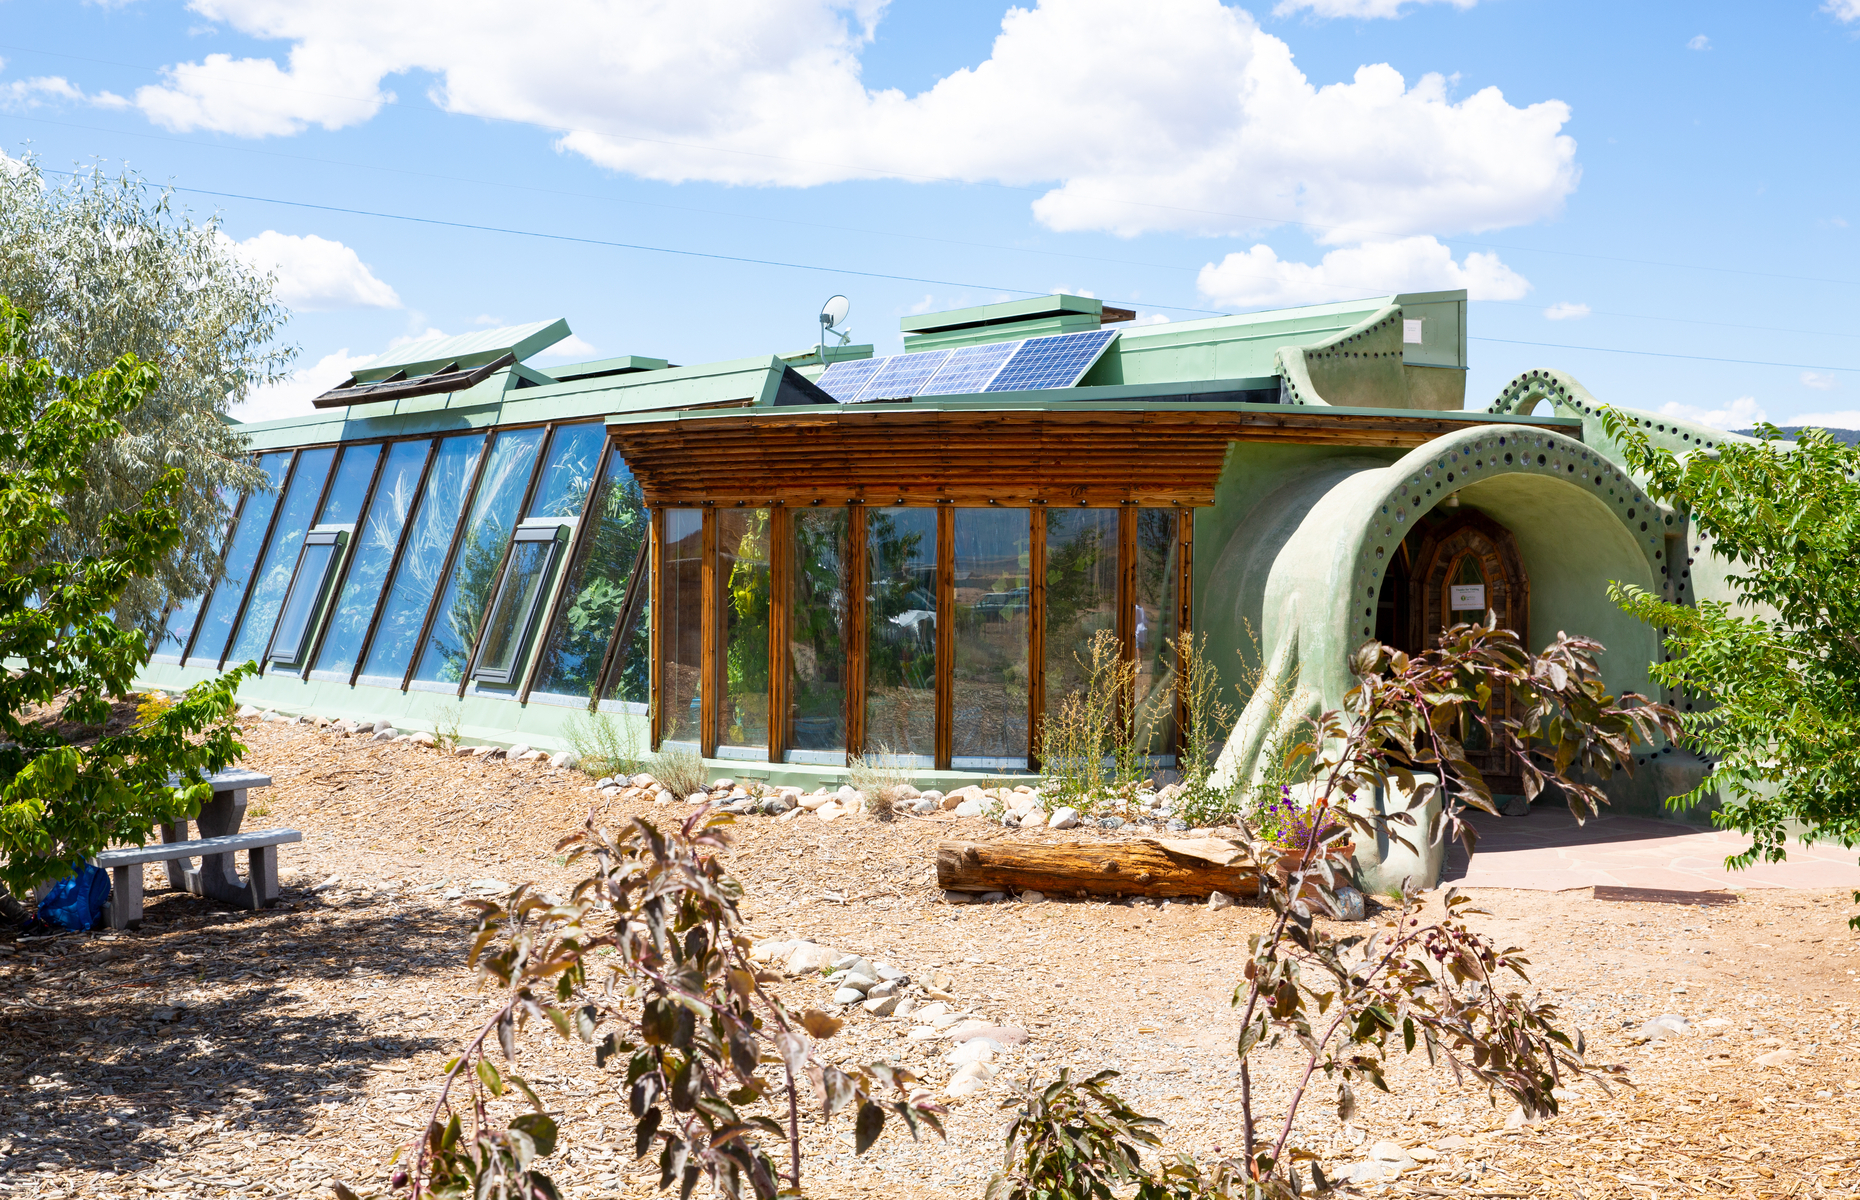 <p class="p1"><span>These off-the-grid sustainable homes, made from natural and recycled materials (such as used tires, car batteries, and glass bottles), look somehow futuristic and primitive at the same time.</span><span> Designed </span><span>by architect Michael Reynolds, “<a href="https://taos.org/places/earthship-biotecture/" rel="noreferrer noopener"><span>Earthships</span></a>” are located on a beautiful mesa just outside of Taos.</span></p>